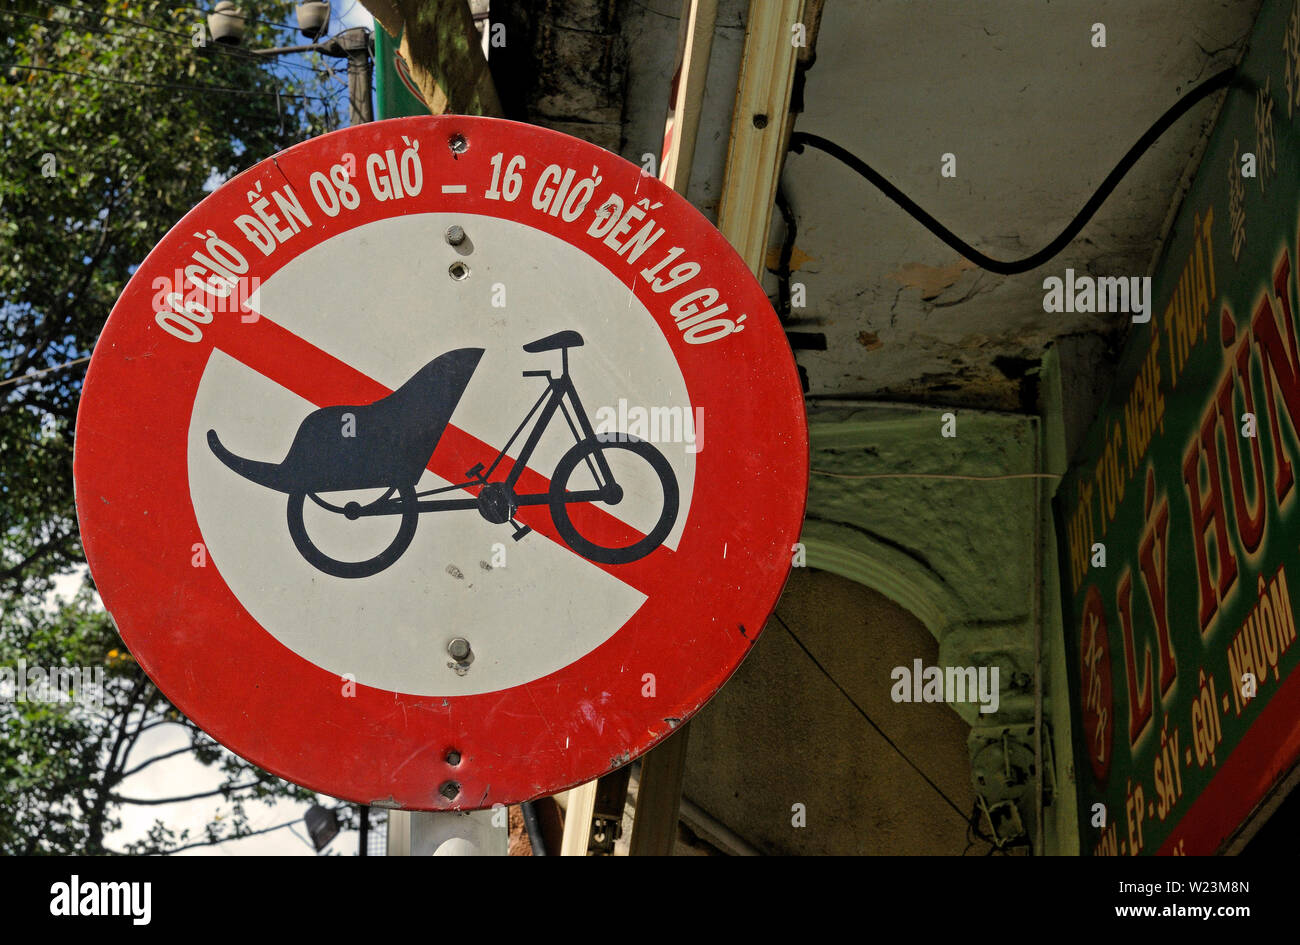 ho chi minh city, vietnam - november 06, 2008: a traffic sign indicating  no trespass for trishaws in cholon old town Stock Photo